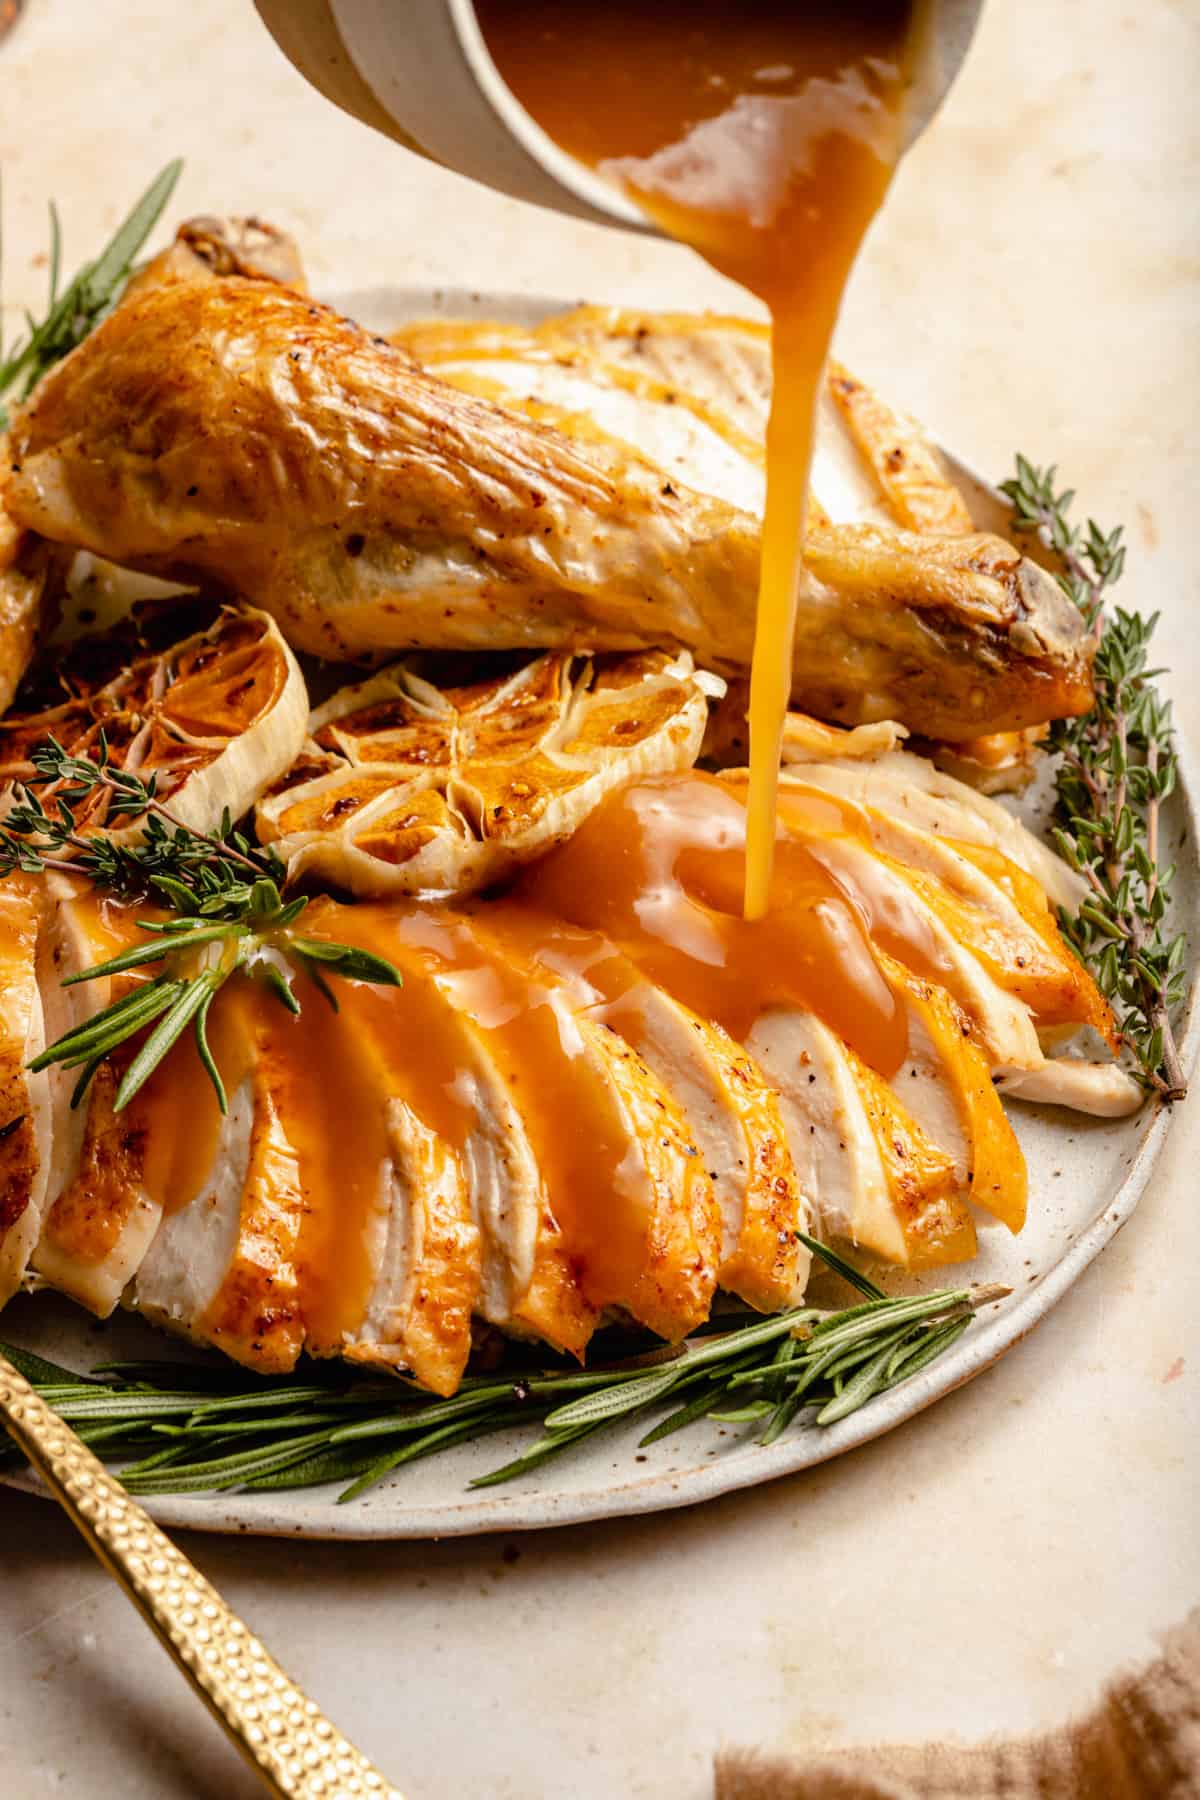 Gravy being poured over the roasted chicken on a plate with herbs. 